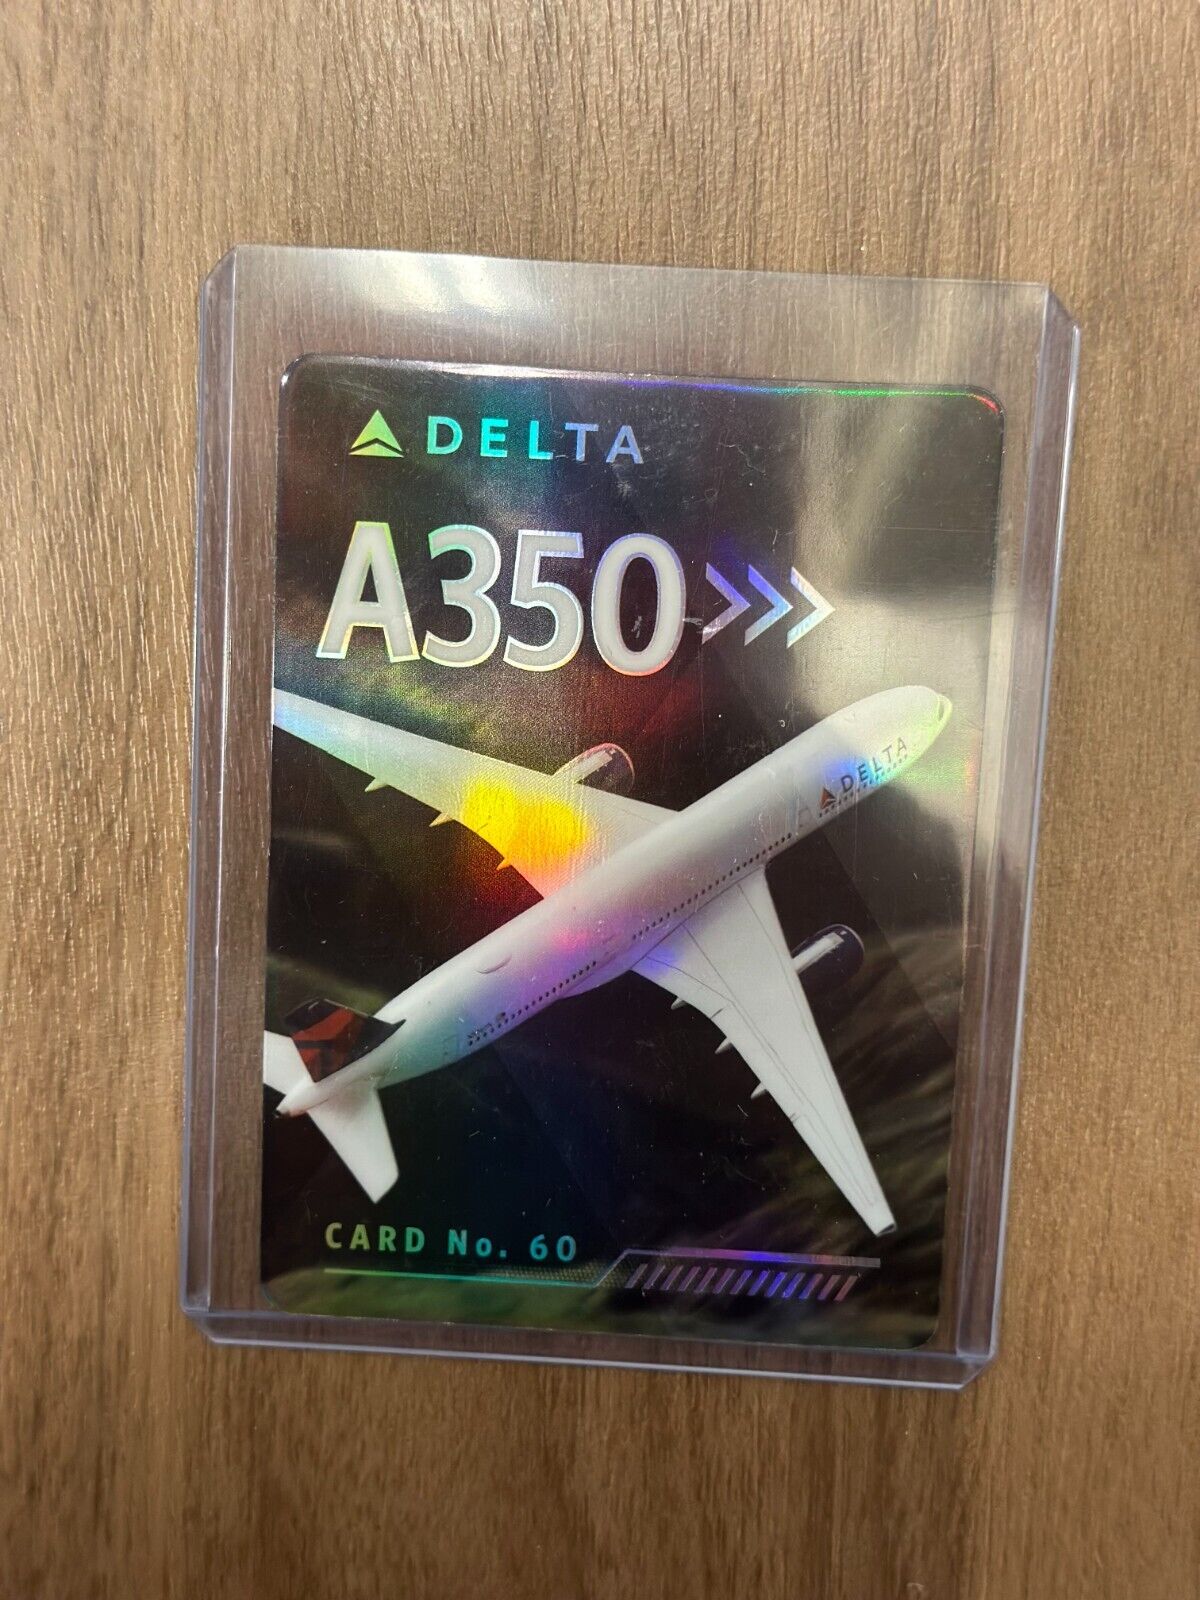 DELTA AIRLINES AIRBUS A350-900 CARD 2022 VERSION MINT PILOT TRADING CARD NEW